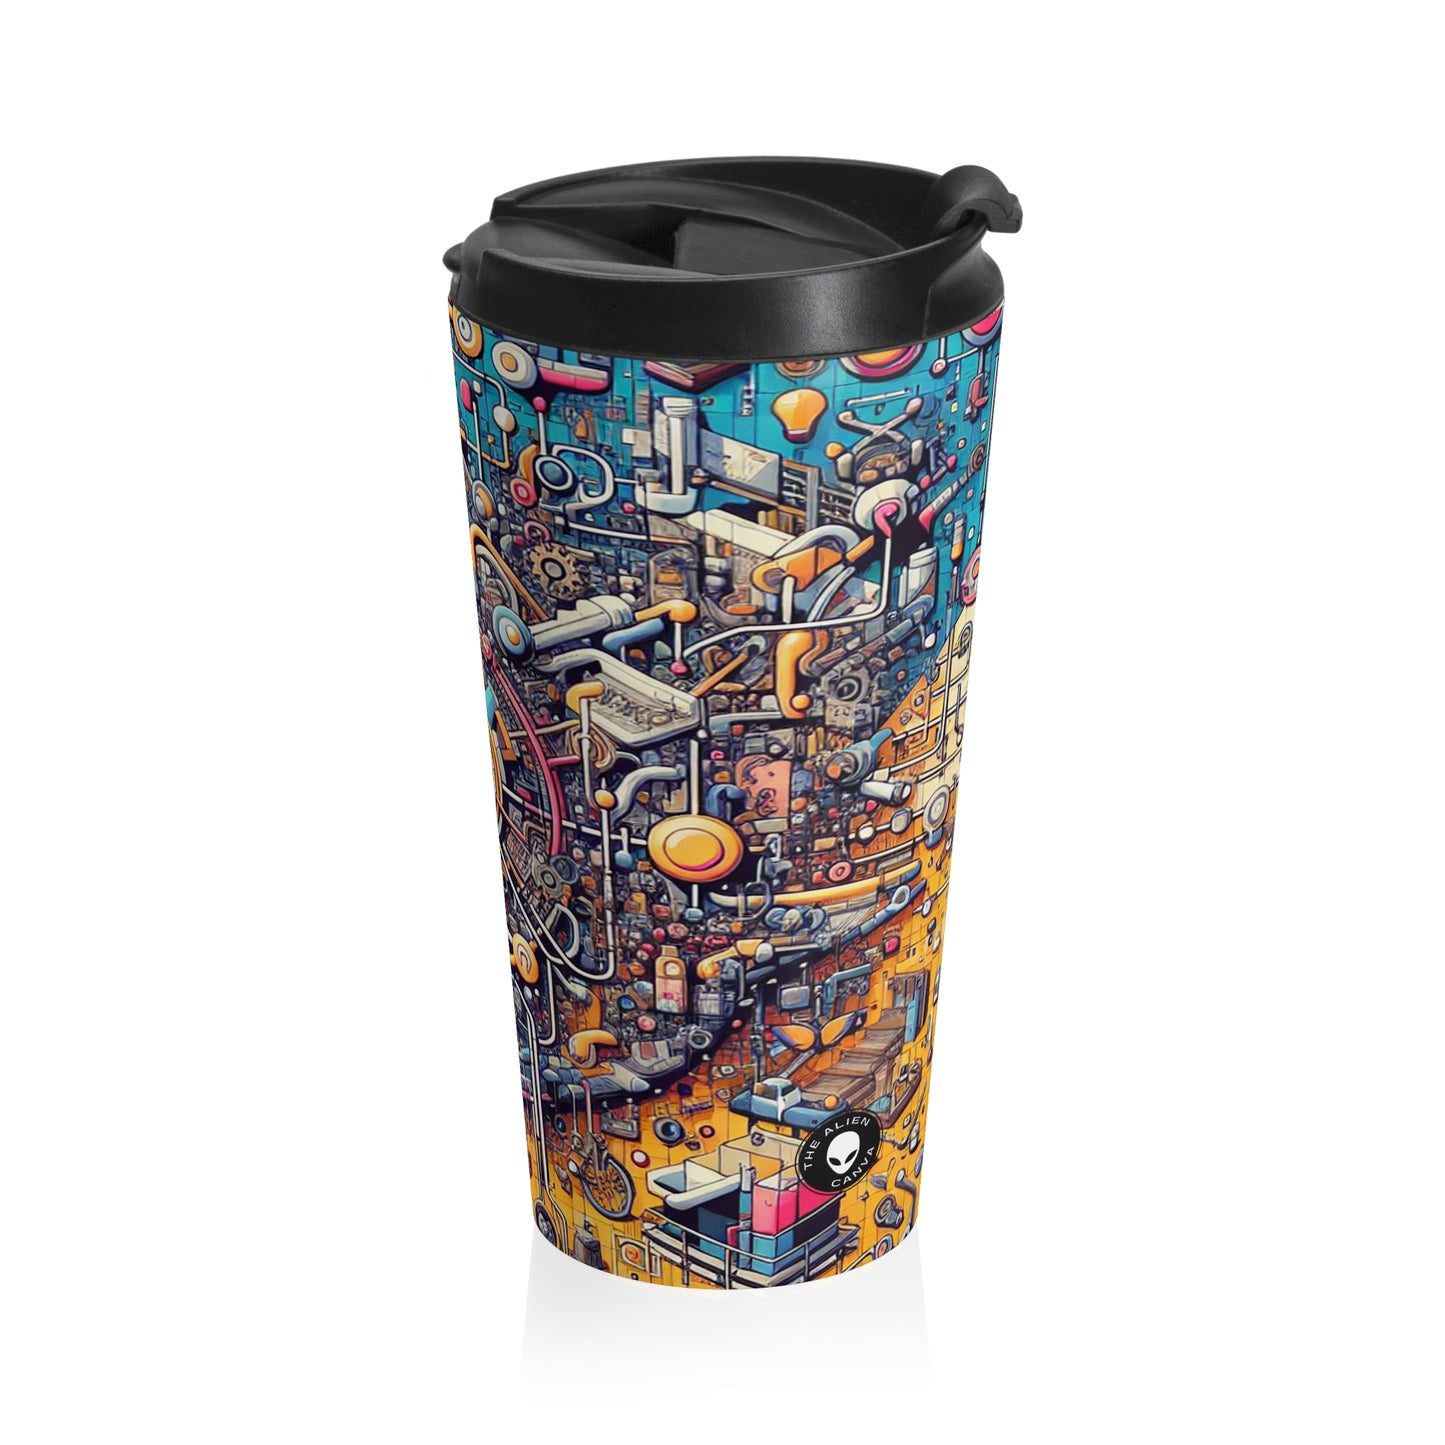 "Connection Points: Exploring Human Interactions in Public Spaces" - The Alien Stainless Steel Travel Mug Relational Art